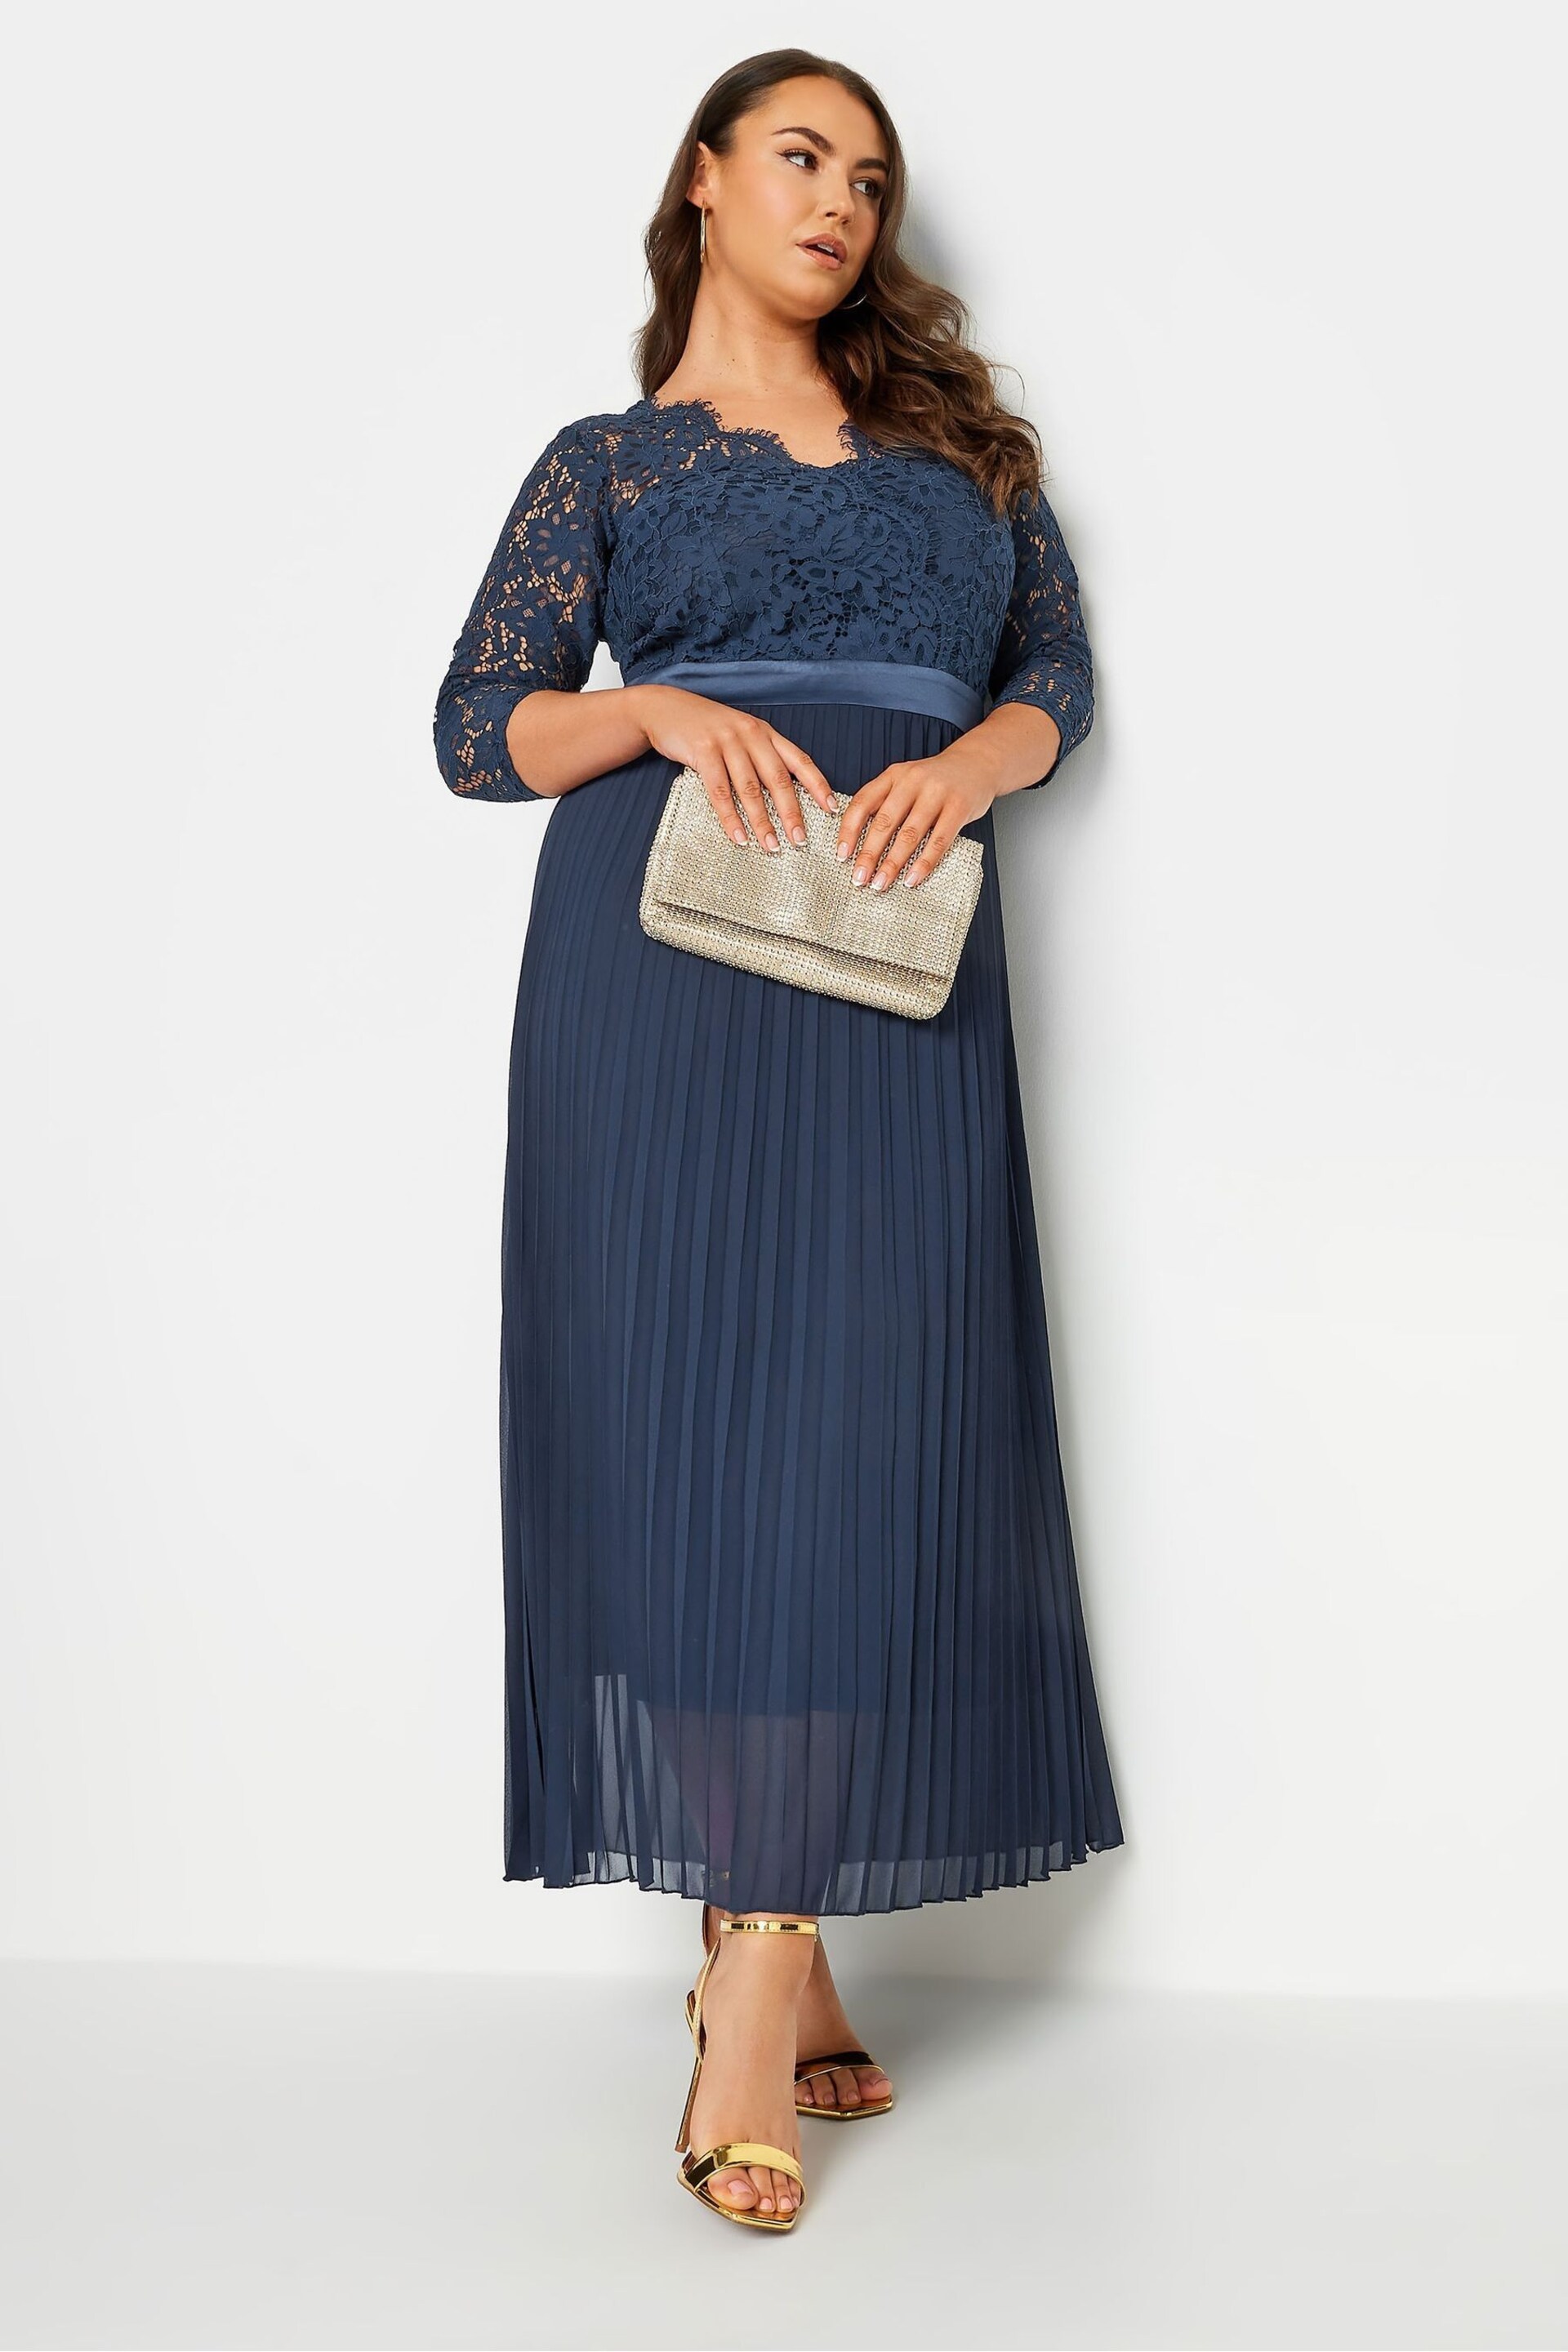 Yours Curve Blue Lace Wrap Pleated Maxi Dress - Image 3 of 4